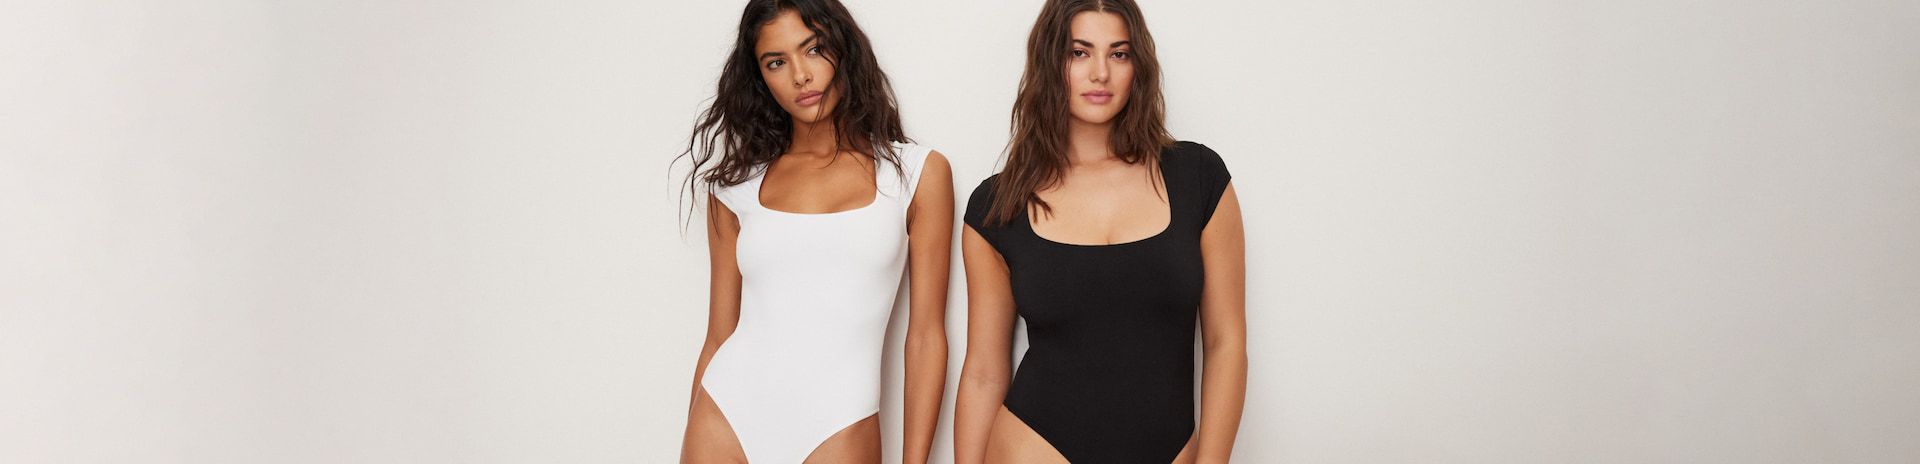 One model wears a white short sleeve sculpt bodysuit and another model wears the same bodysuit in black.